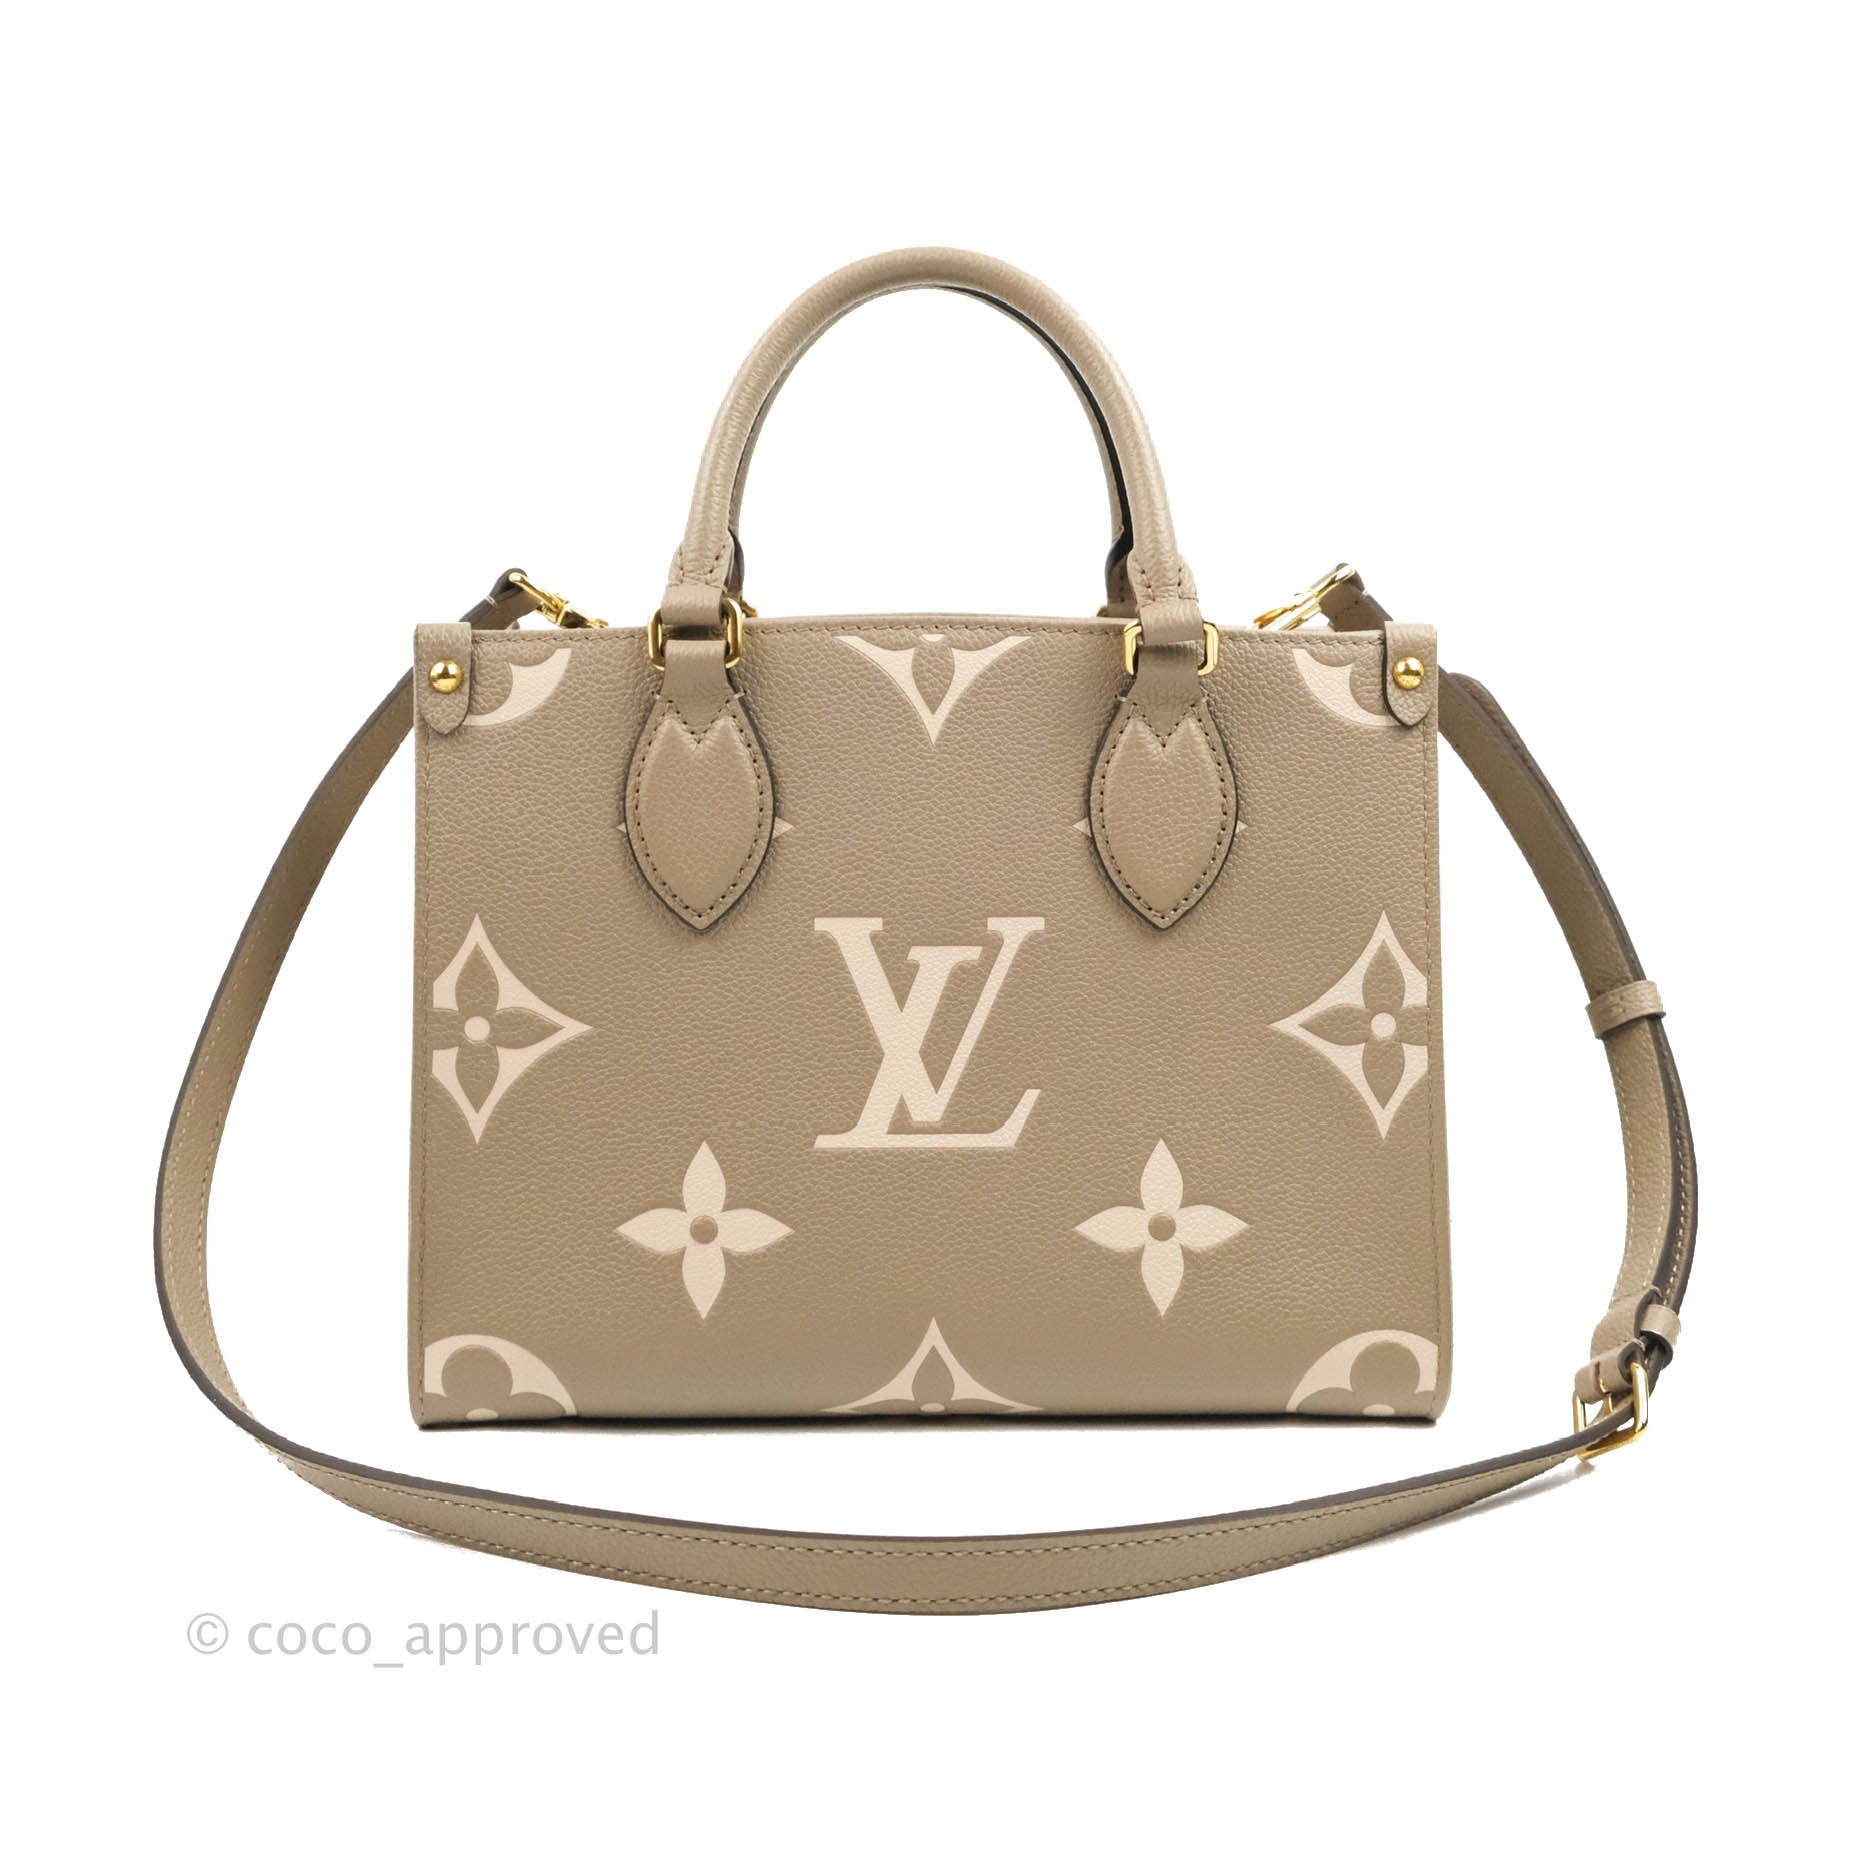 skincare, details and louis vuitton - image #6902258 on